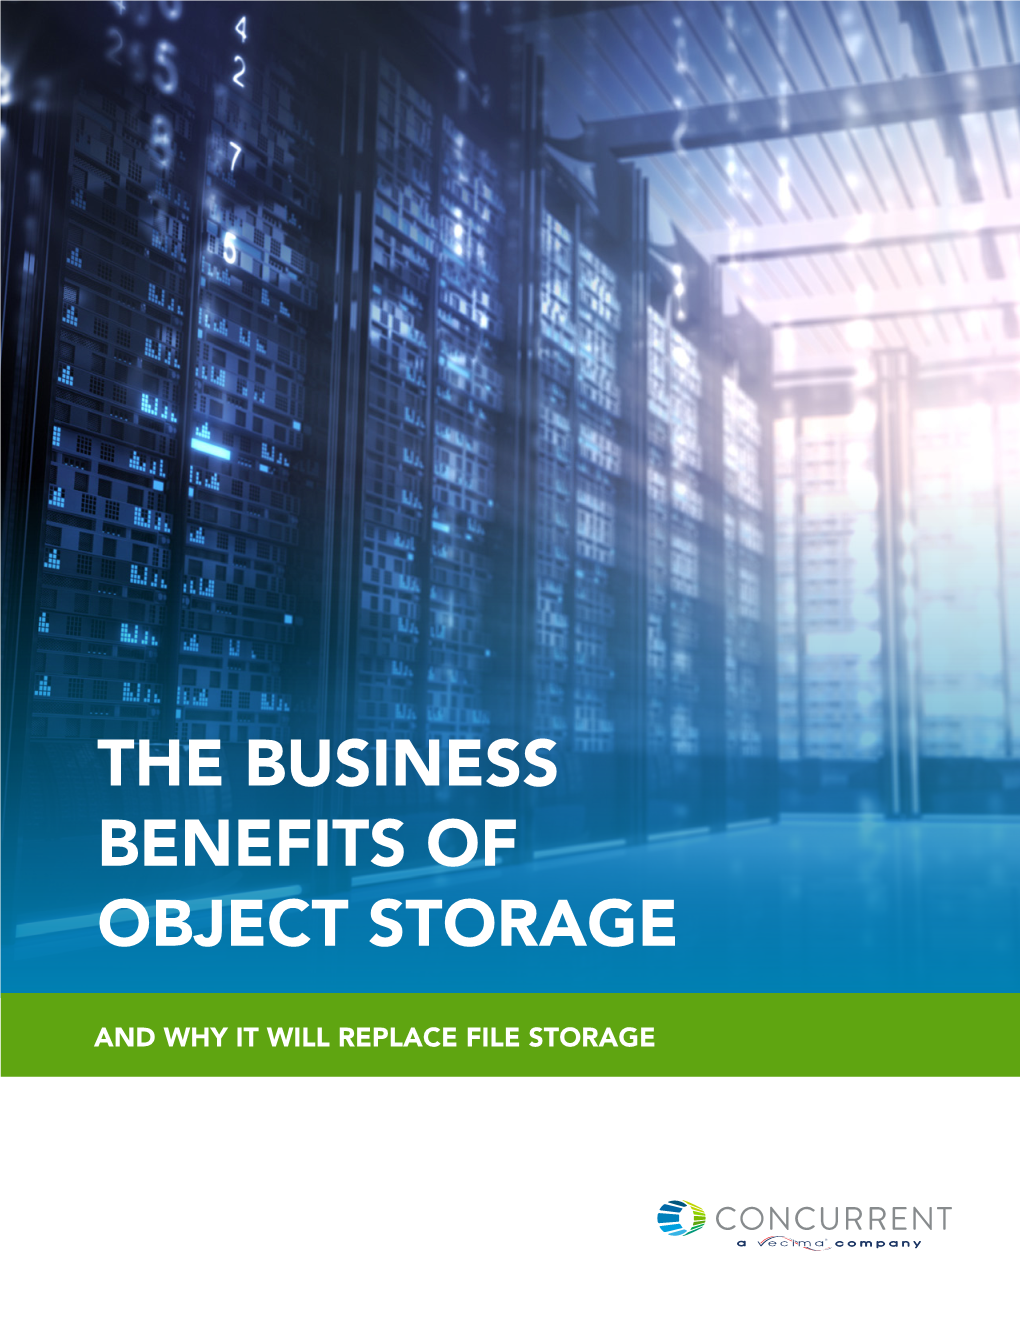 The Business Benefits of Object Storage